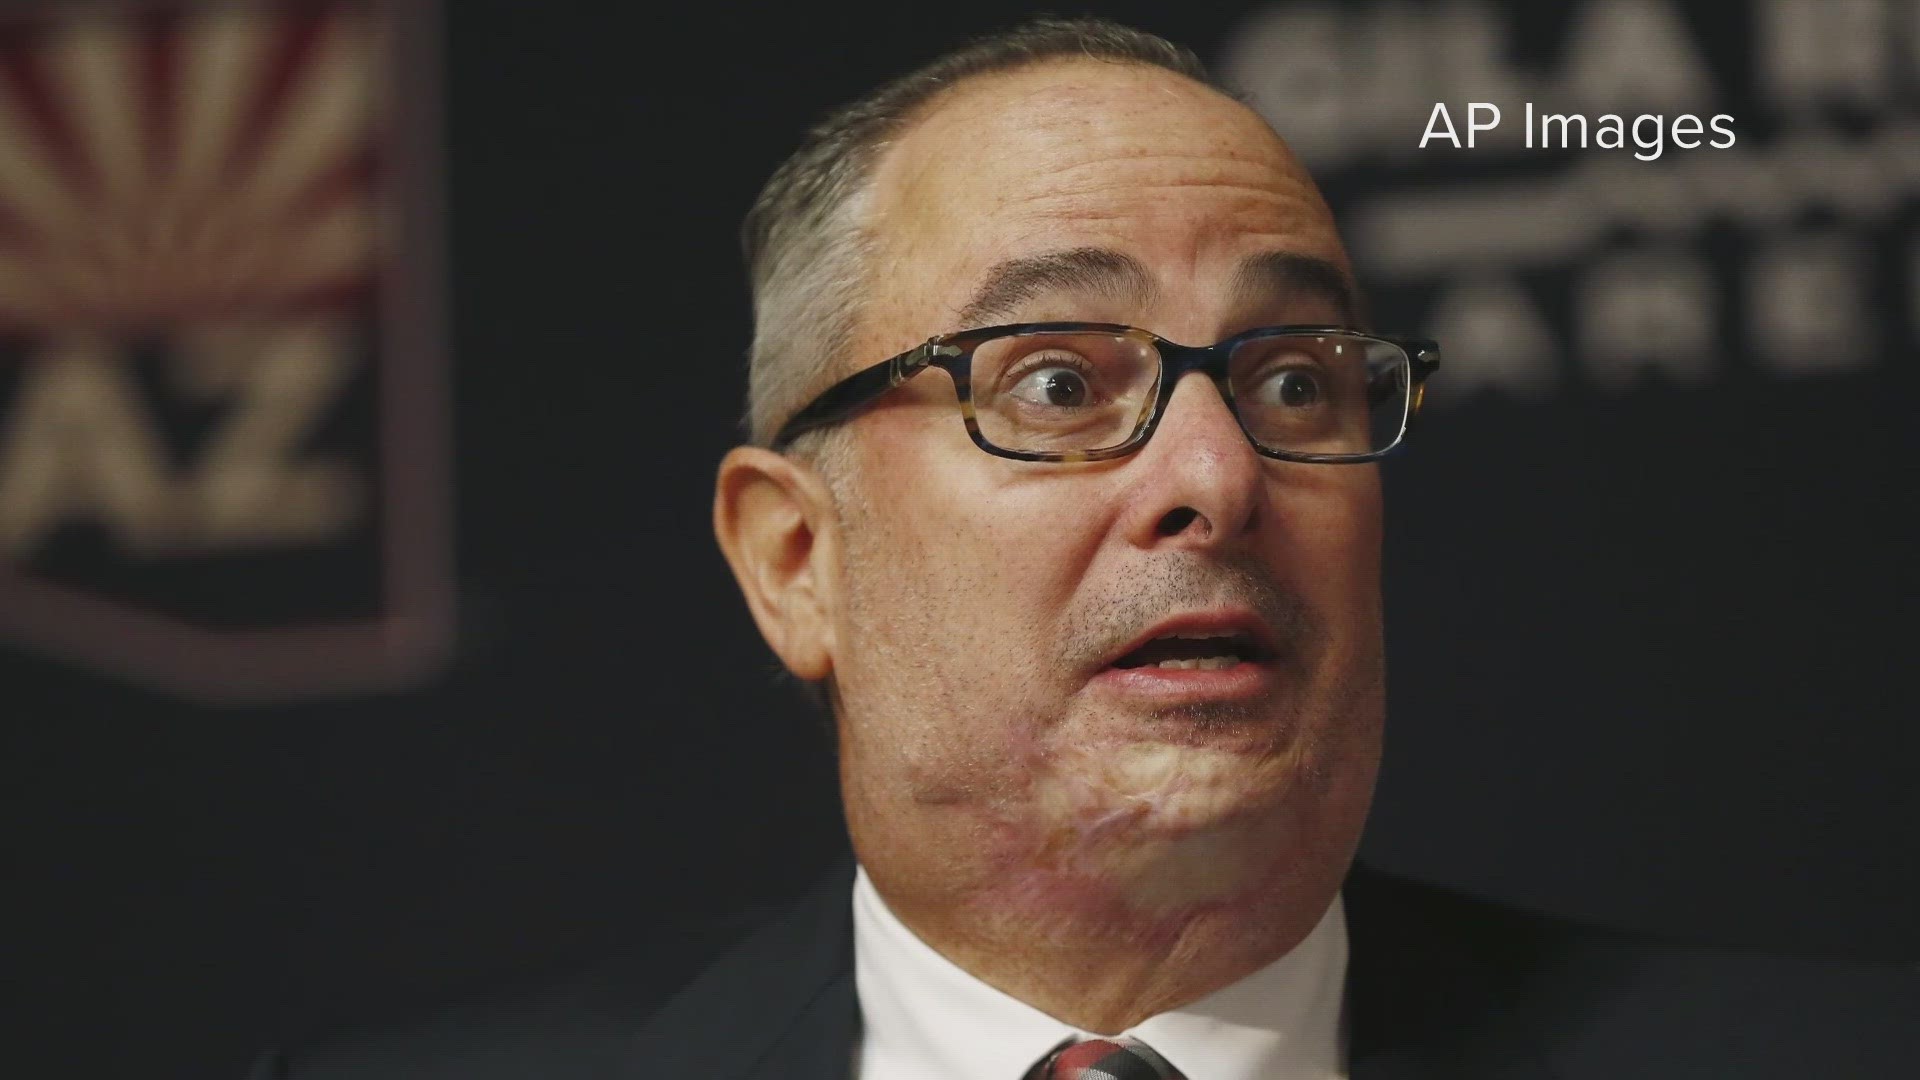 Andrew Barroway was arrested Thursday for a strangulation charge, police said. The National Hockey League has suspended the minority owner of the Arizona Coyotes.